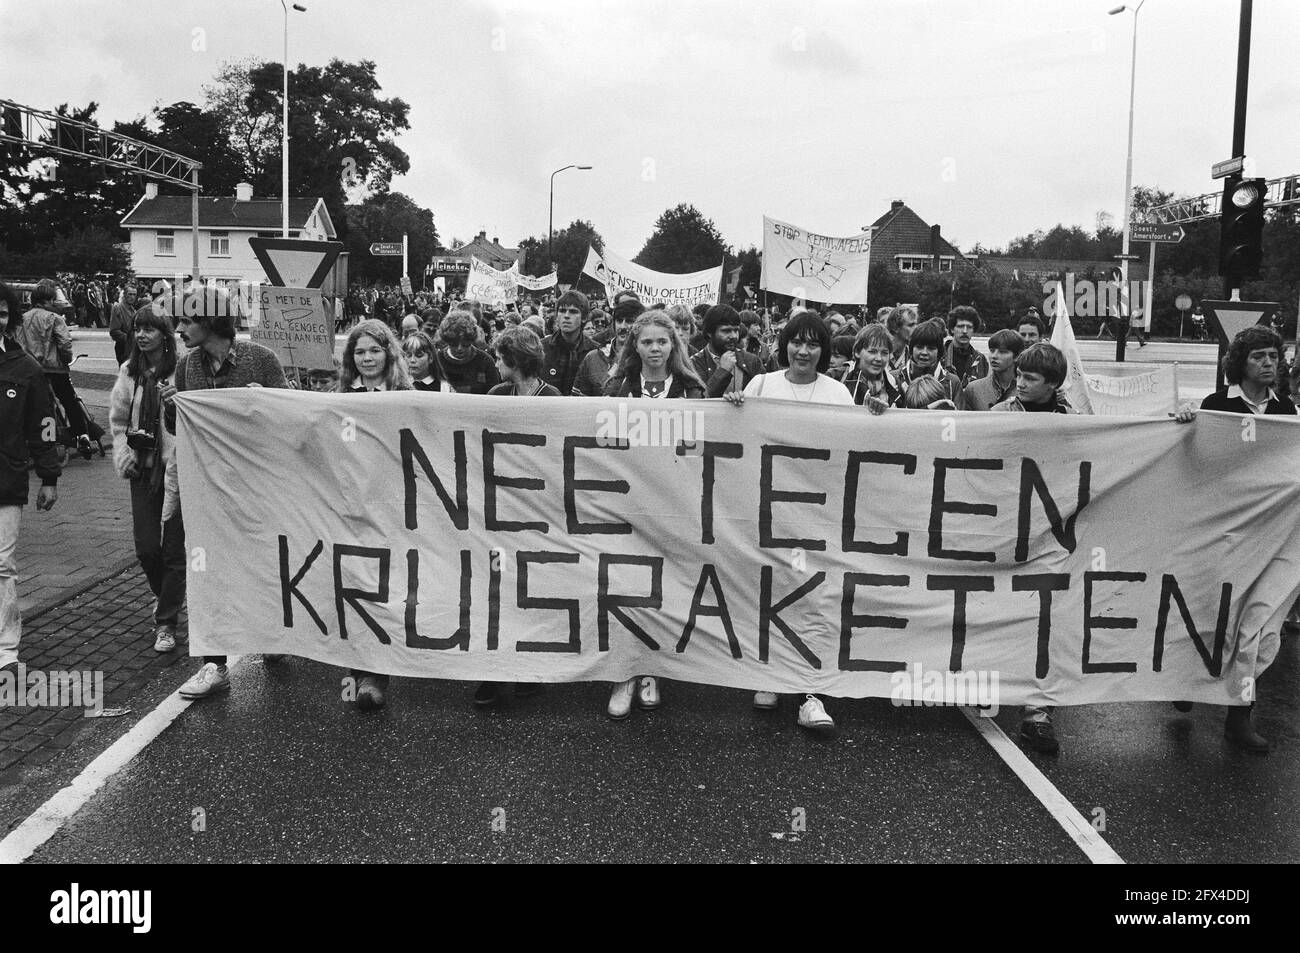 Demonstrators behind a banner, October 9, 1982, protesters, demonstrations, nuclear armament, parades, banners, The Netherlands, 20th century press agency photo, news to remember, documentary, historic photography 1945-1990, visual stories, human history of the Twentieth Century, capturing moments in time Stock Photo